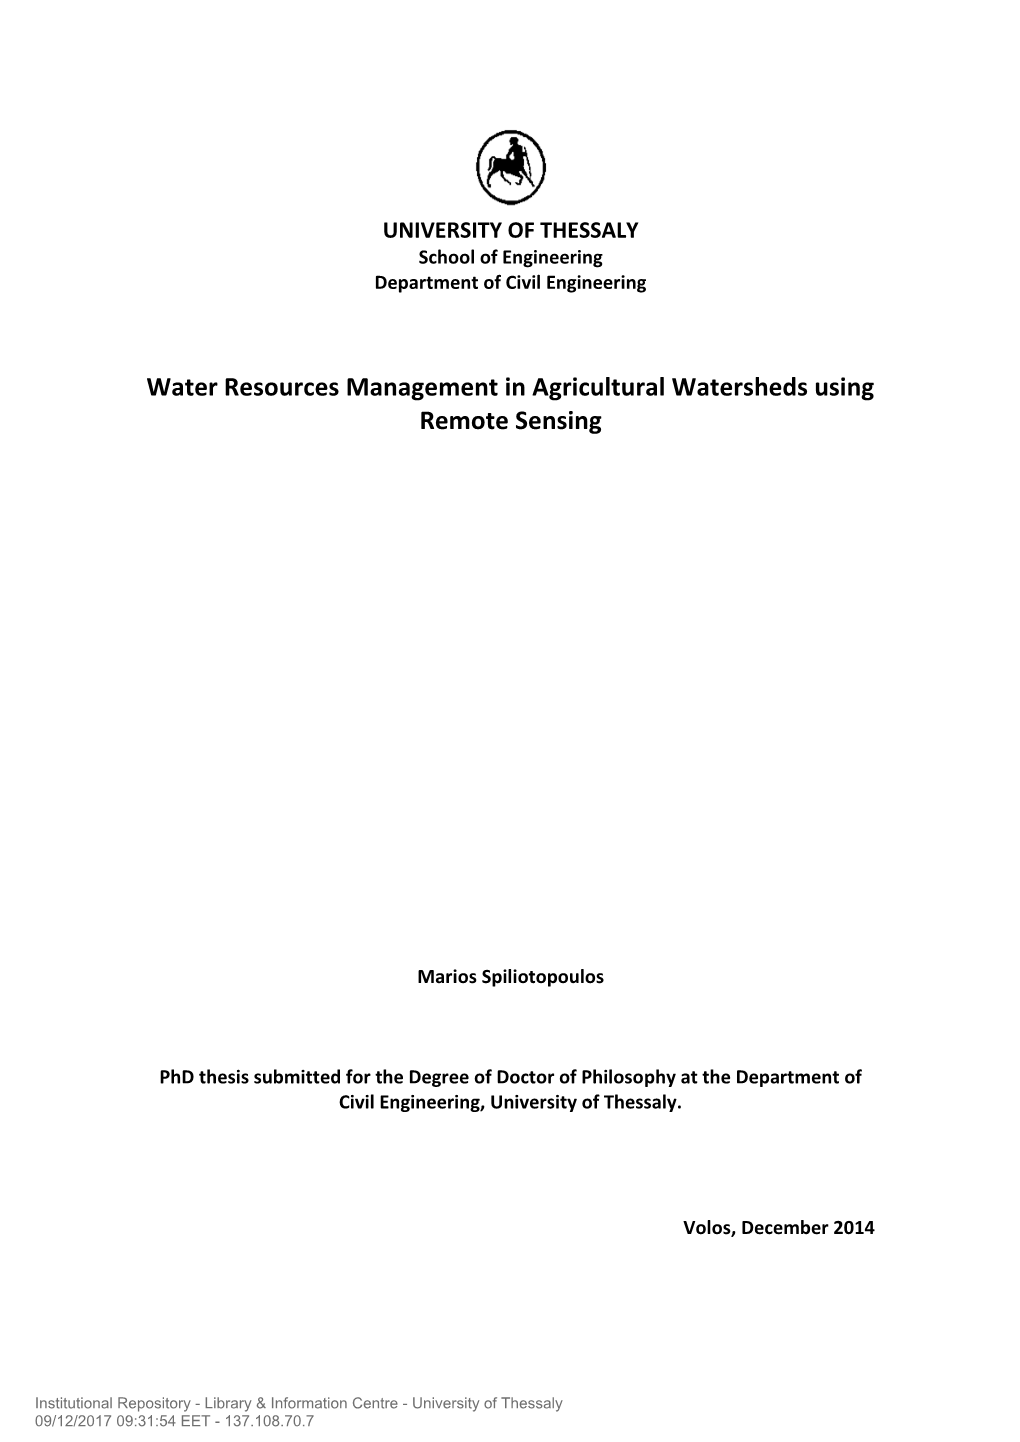 Water Resources Management in Agricultural Watersheds Using Remote Sensing